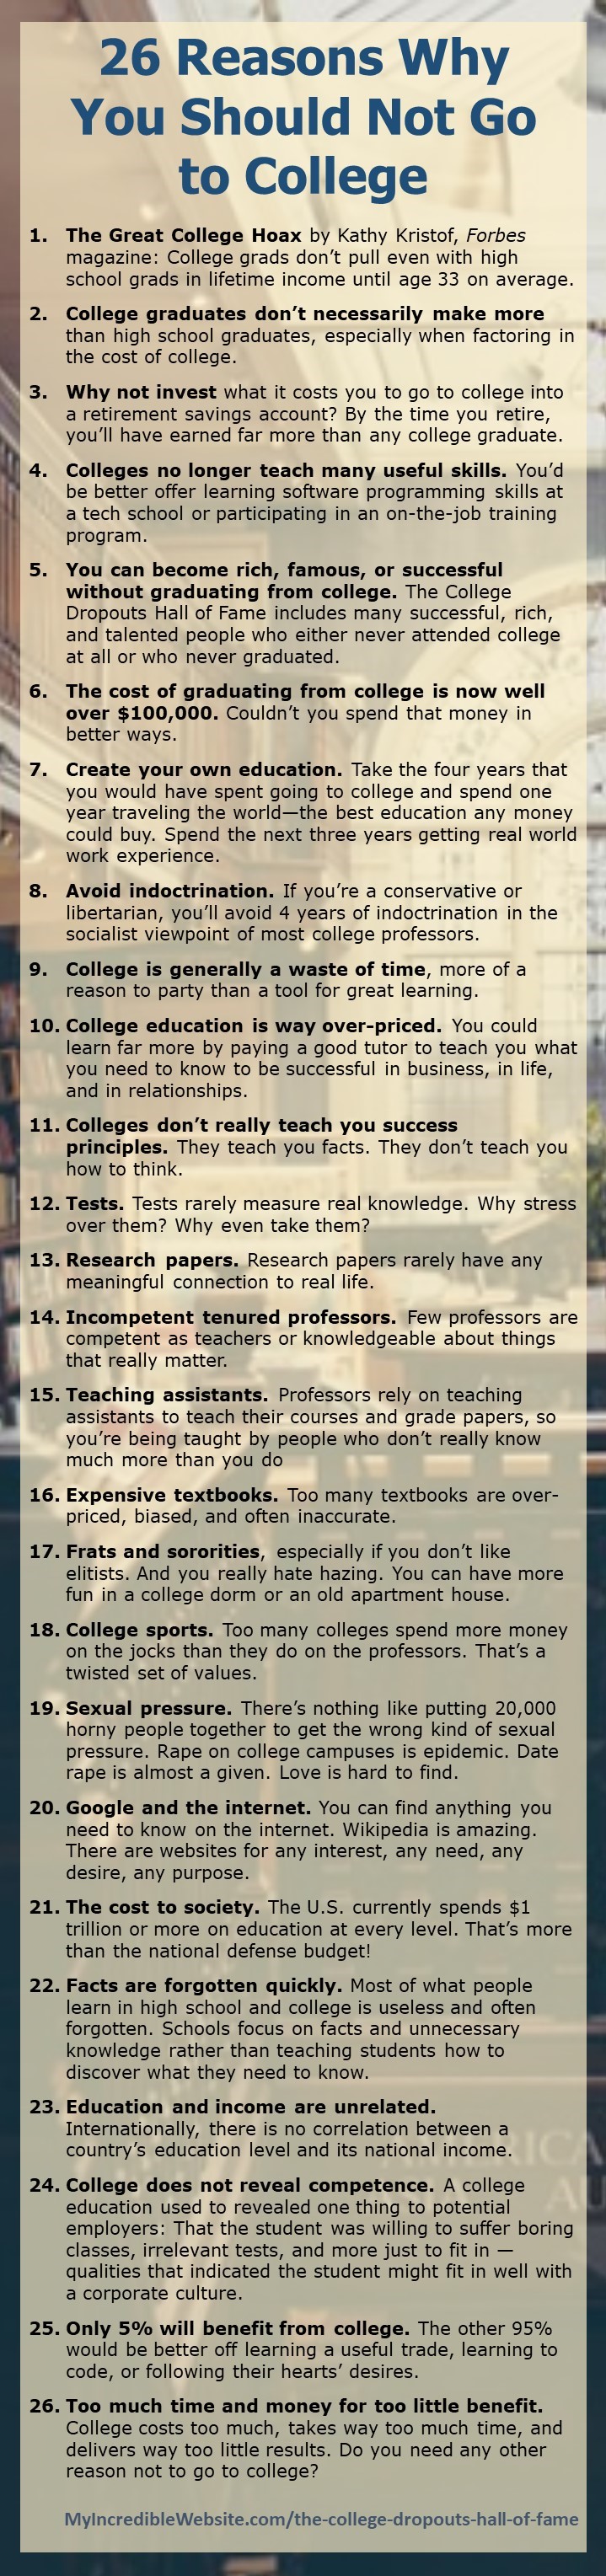 26 Reasons You Should Not Go to College - Skip college and live a great life!